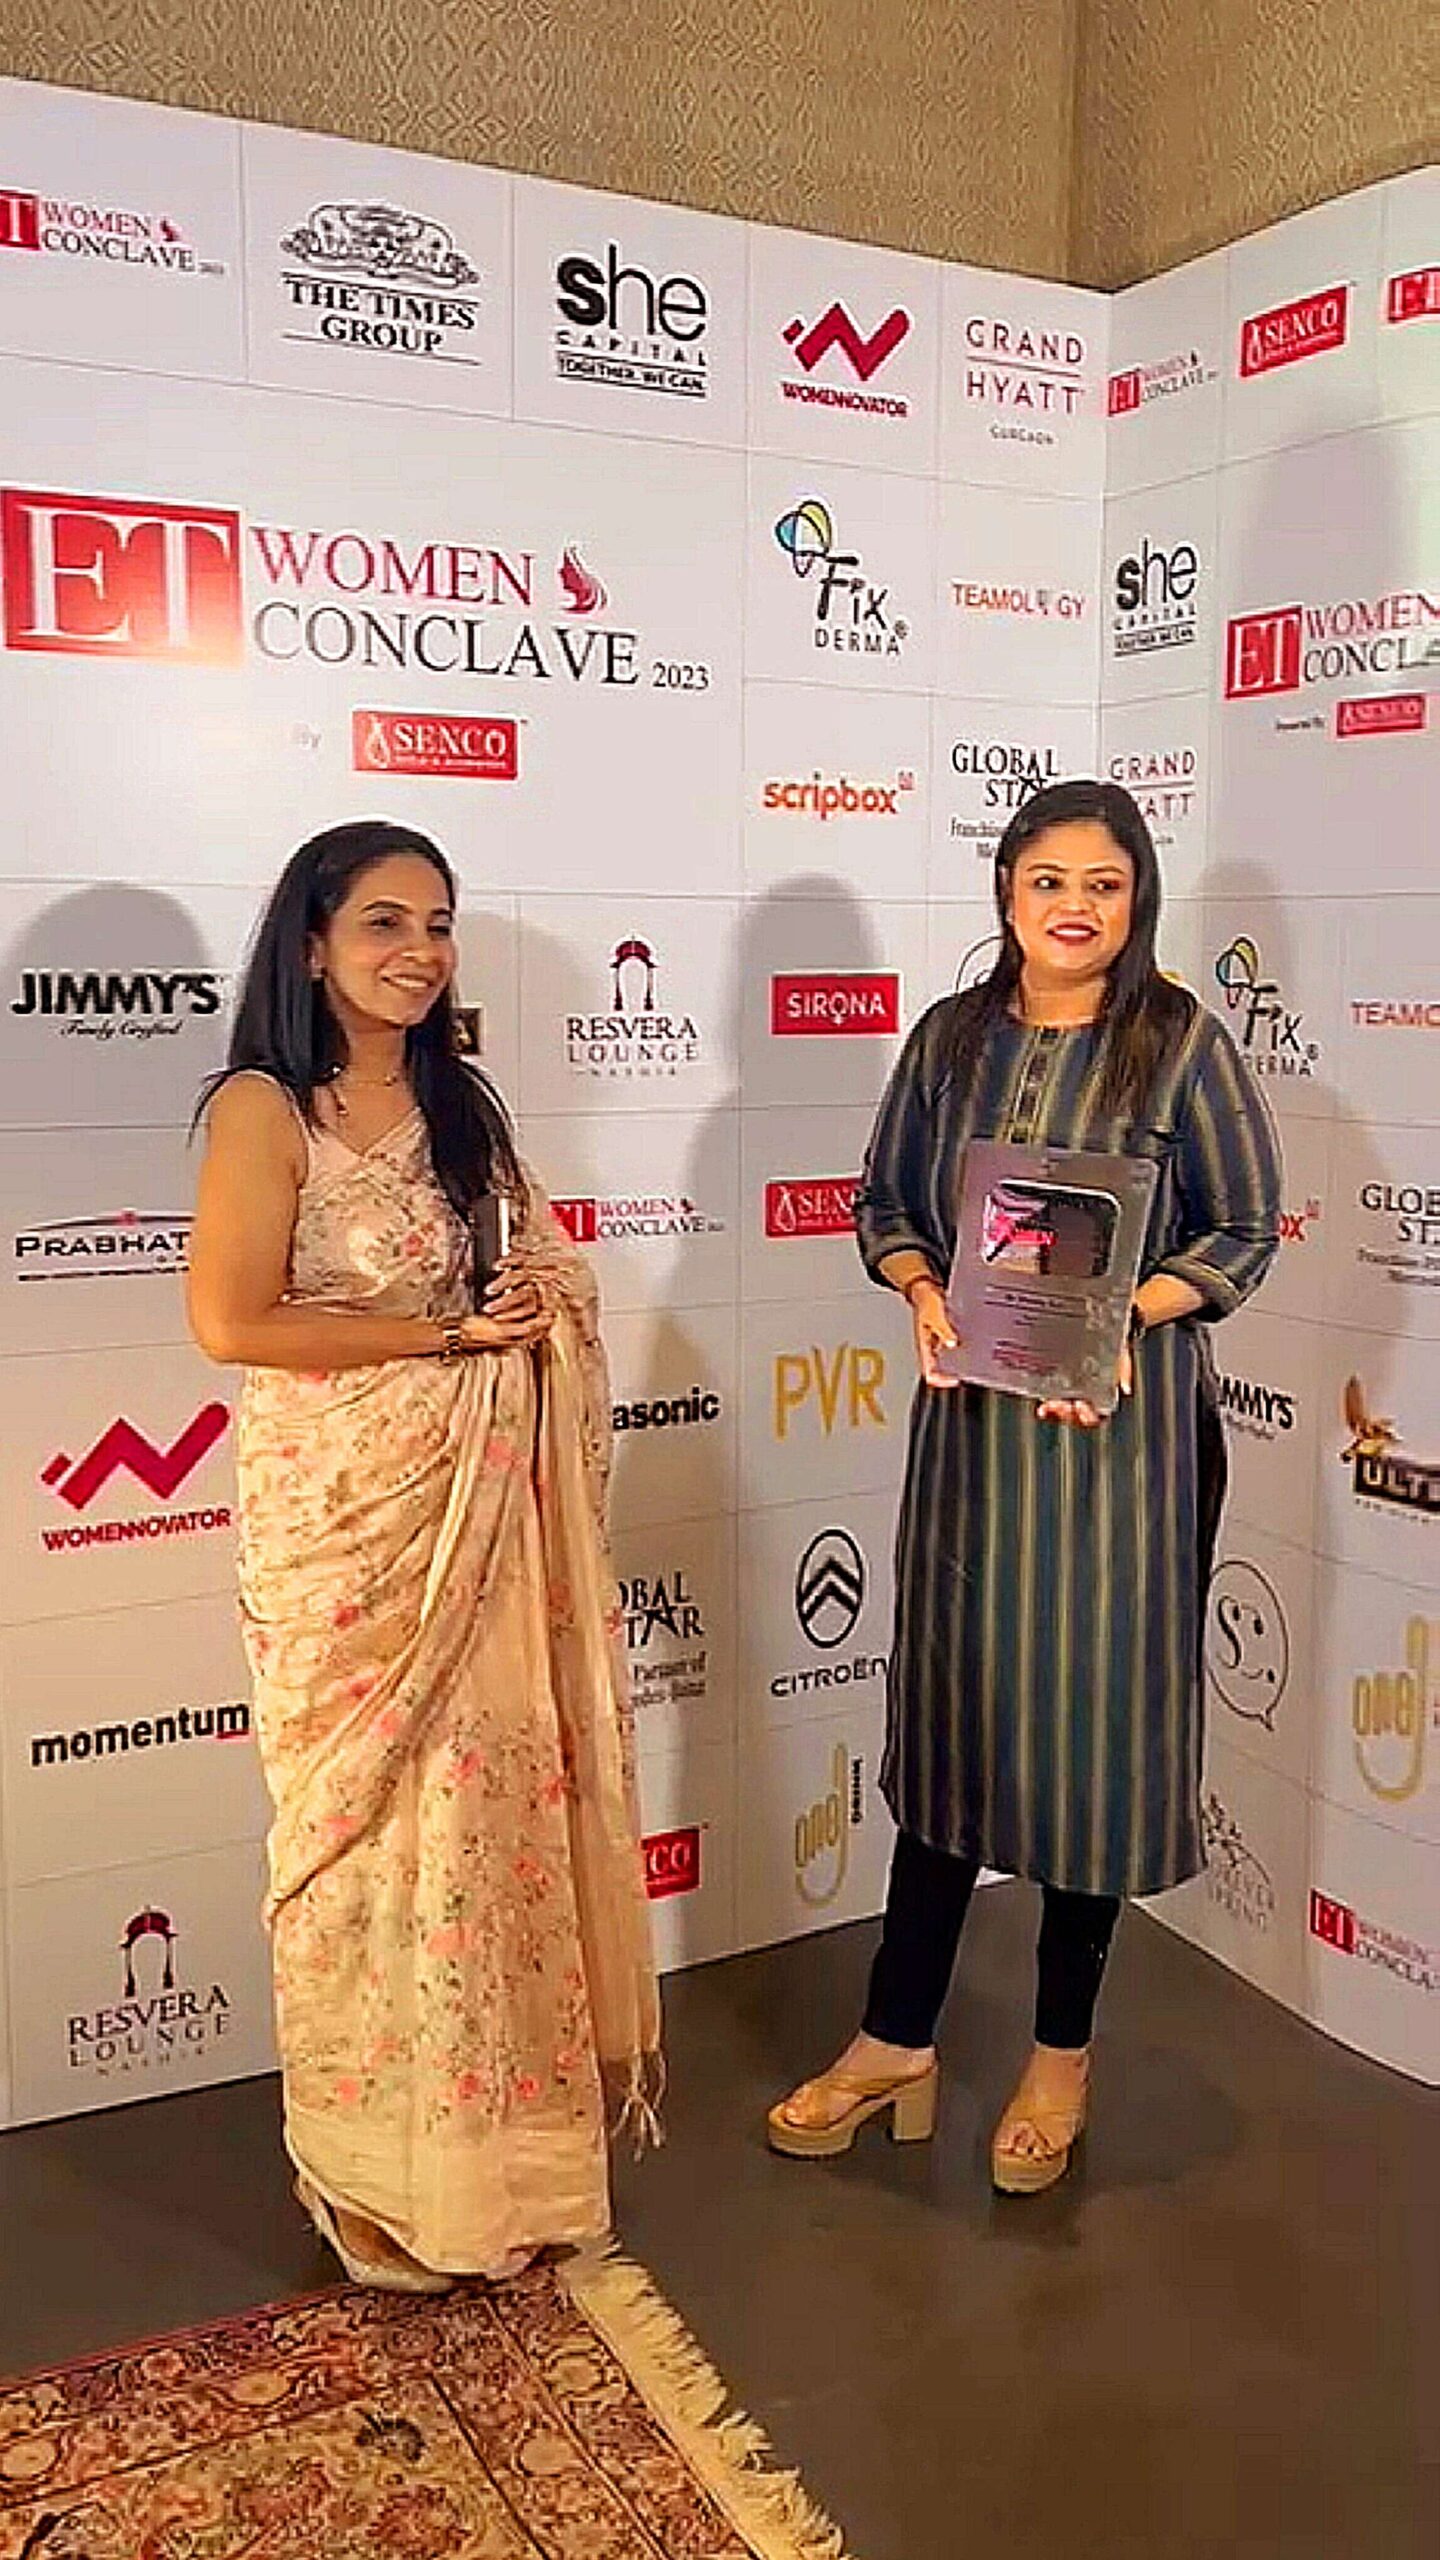 " AWARDED DURING ET WOMEN'S CONCLAVE 2022 "